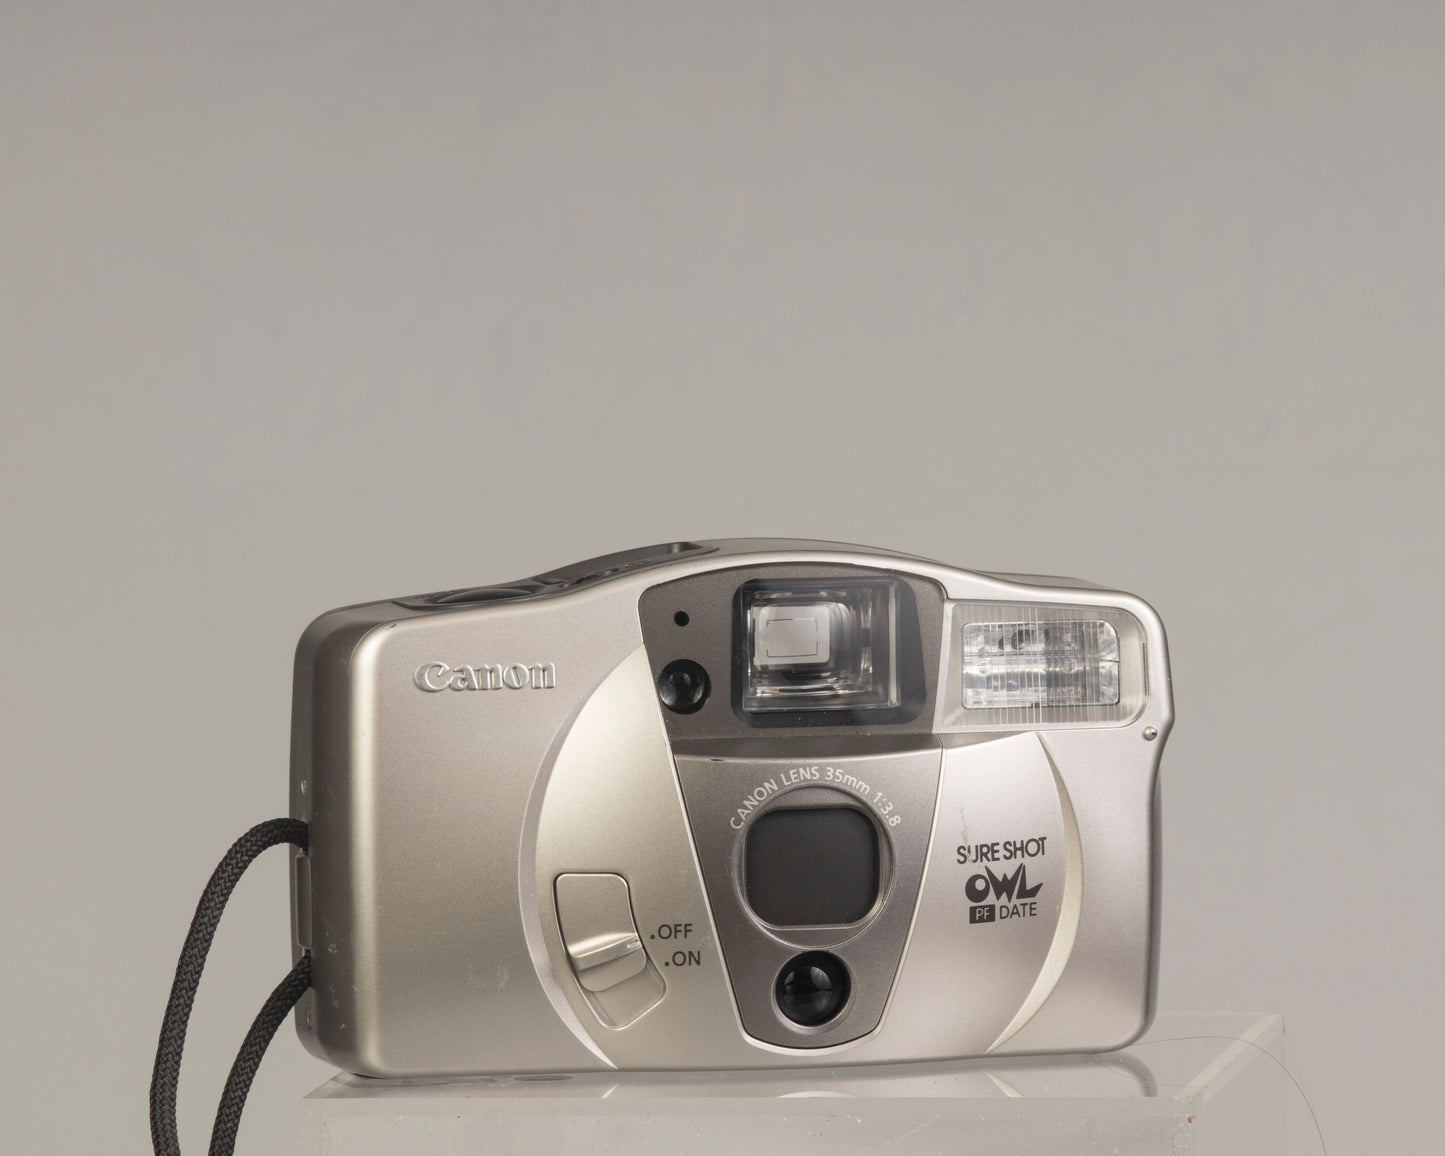 Canon Sure Shot Owl PF Date: a point-and-shoot 35mm film camera with a 35mm f/3.8 lens